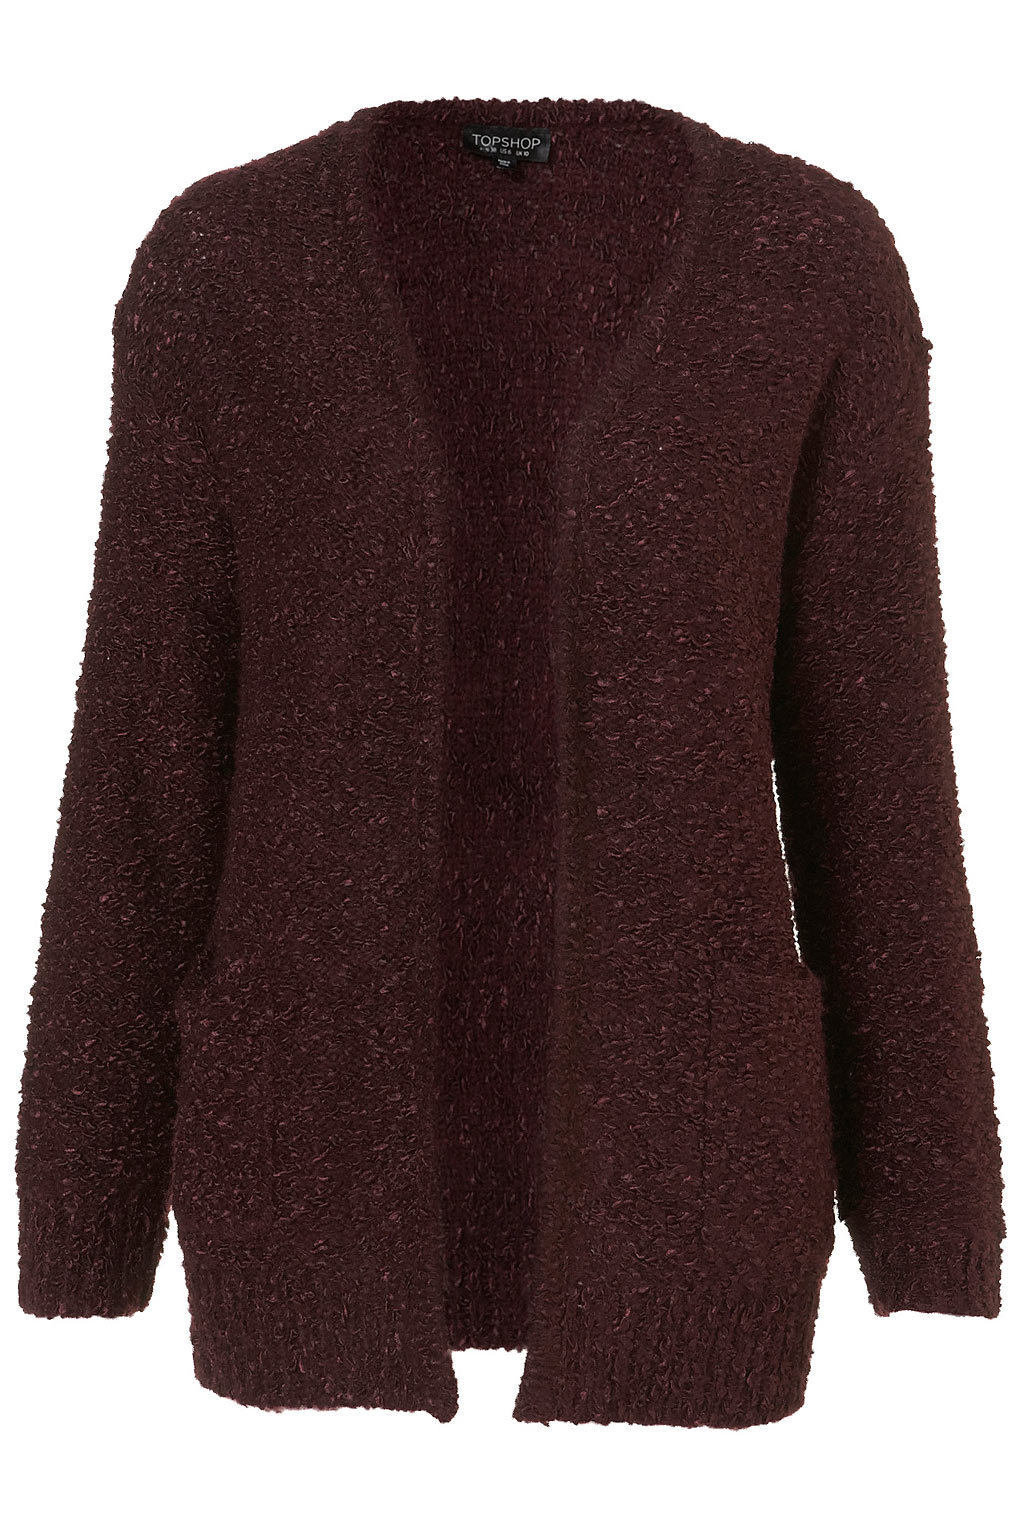 Lyst - Topshop Knitted Pearl Stitch Cardigan in Red